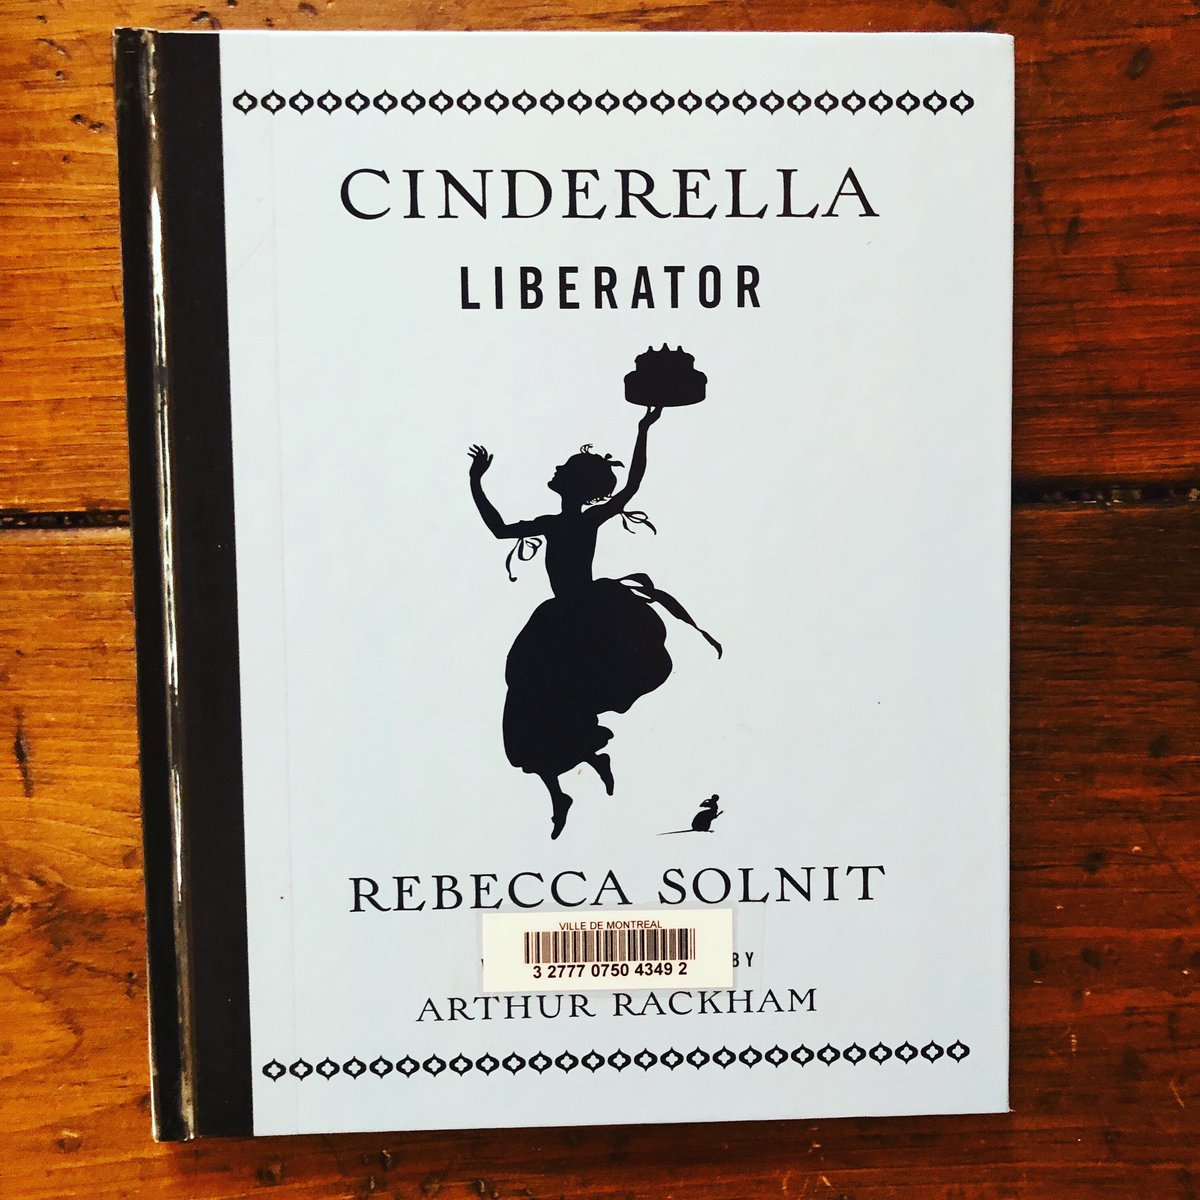 22/52Cinderella Liberator by Rebecca Solnit. A very contemporary retelling of a fairy tale in which, among other surprises, Cinderella’s dress has *pockets*  #52booksin52weeks  #2020books  #booksof2020